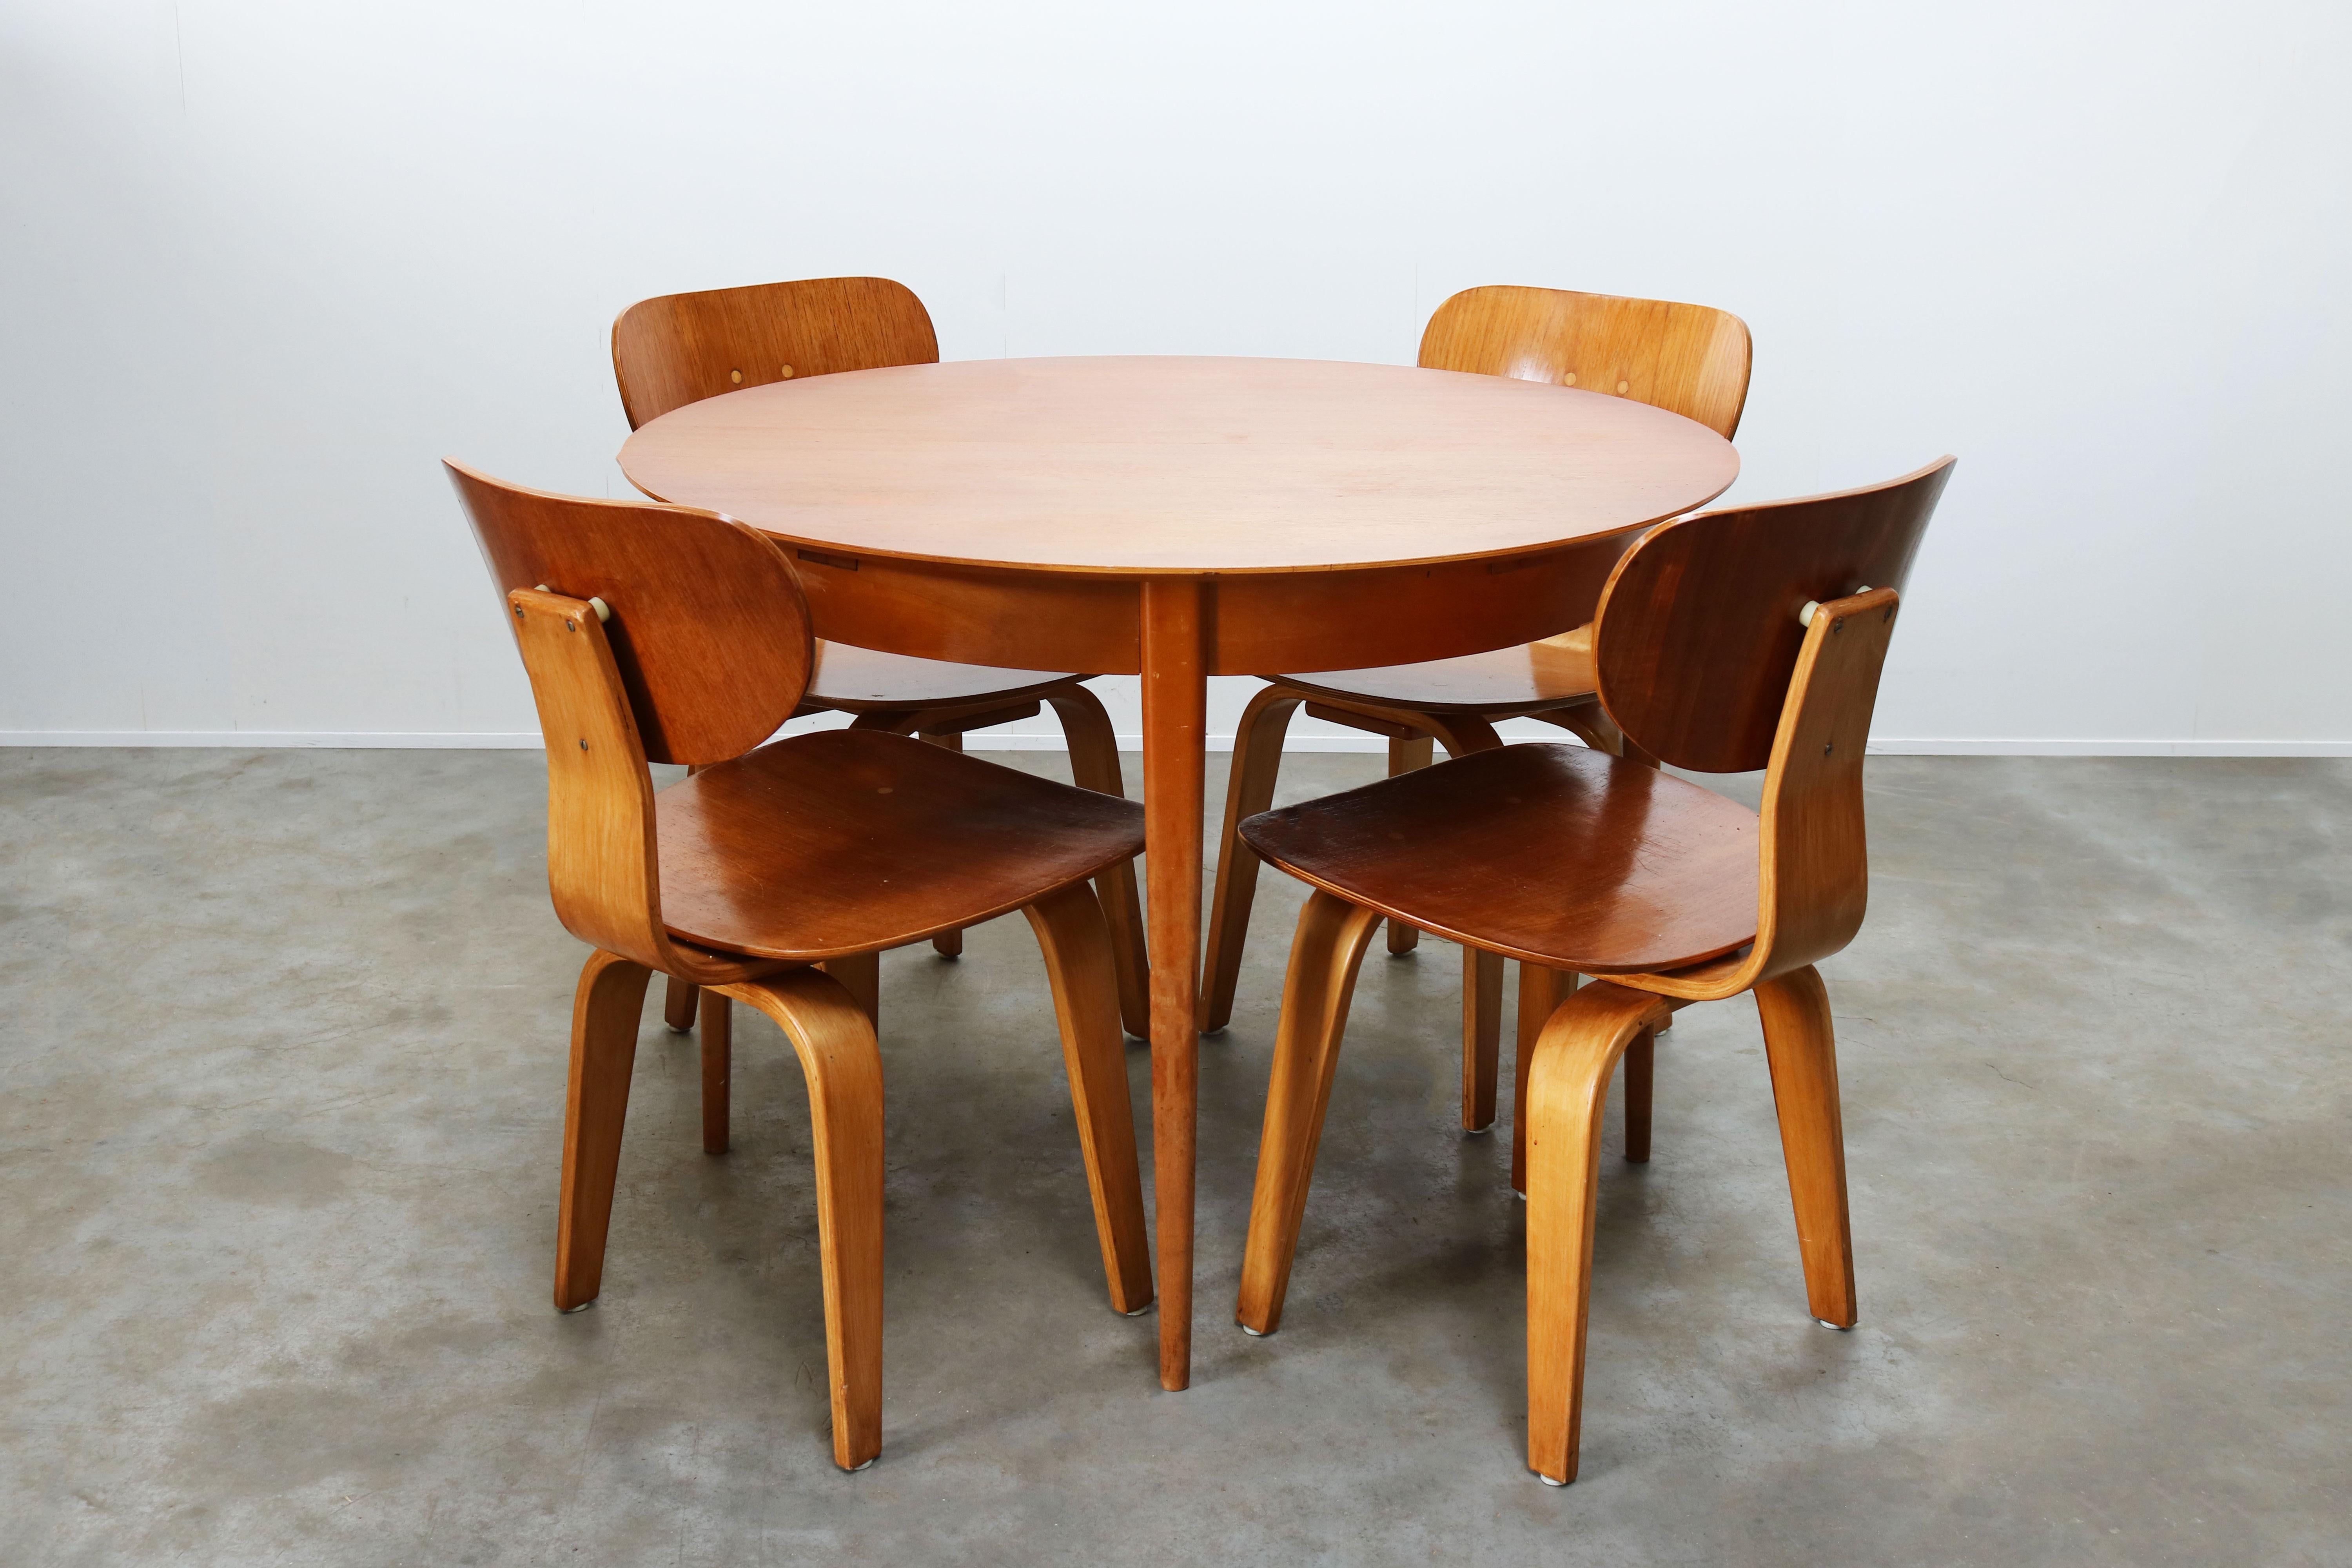 Wonderful Dutch design dining room set designed by Cees Braakman for UMS Pastoe 1952. The set consists of four iconic SB02 birch teak chairs and a matching TB05 teak extendable round table in teak and birch. Set is in great vintage condition with